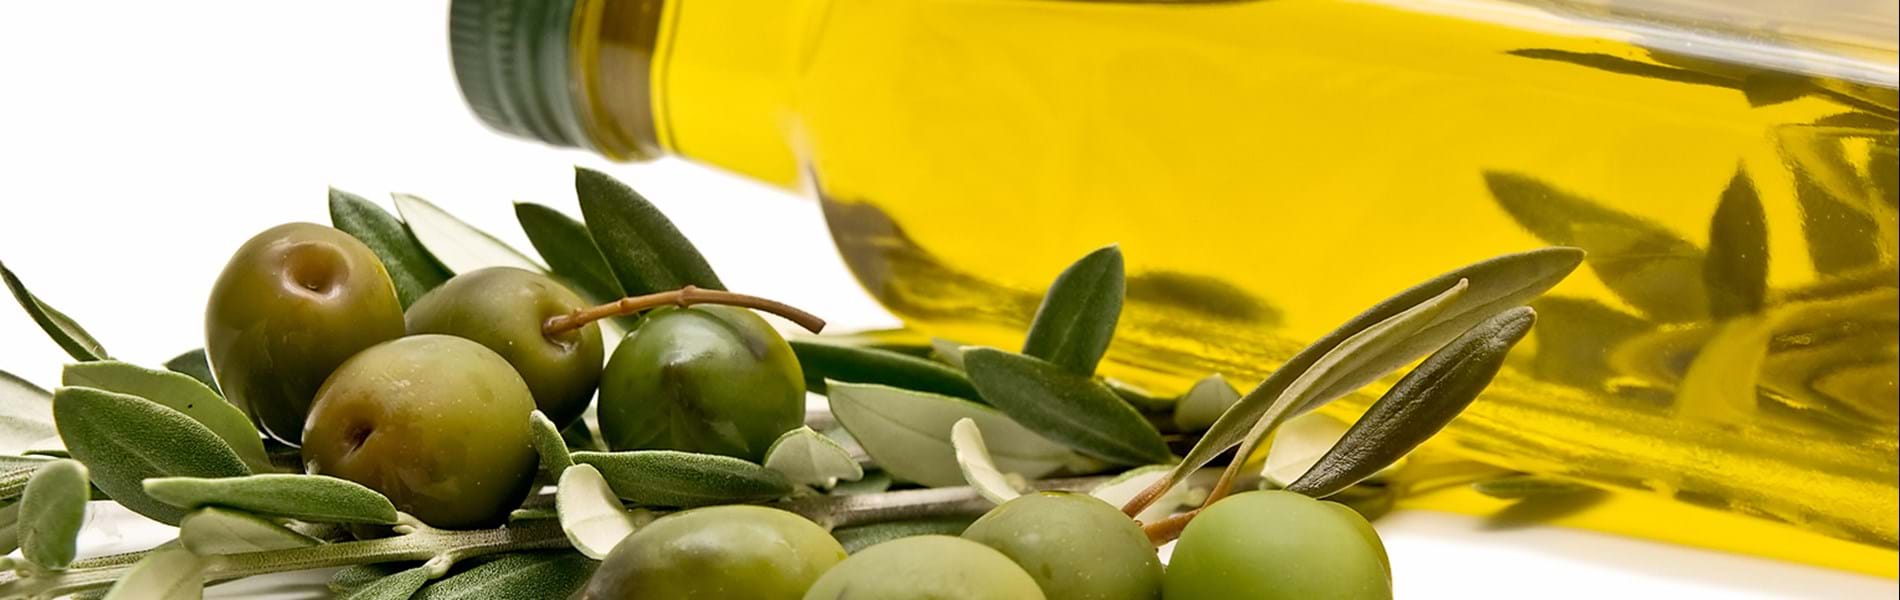 Tackling food fraud in the olive oil industry